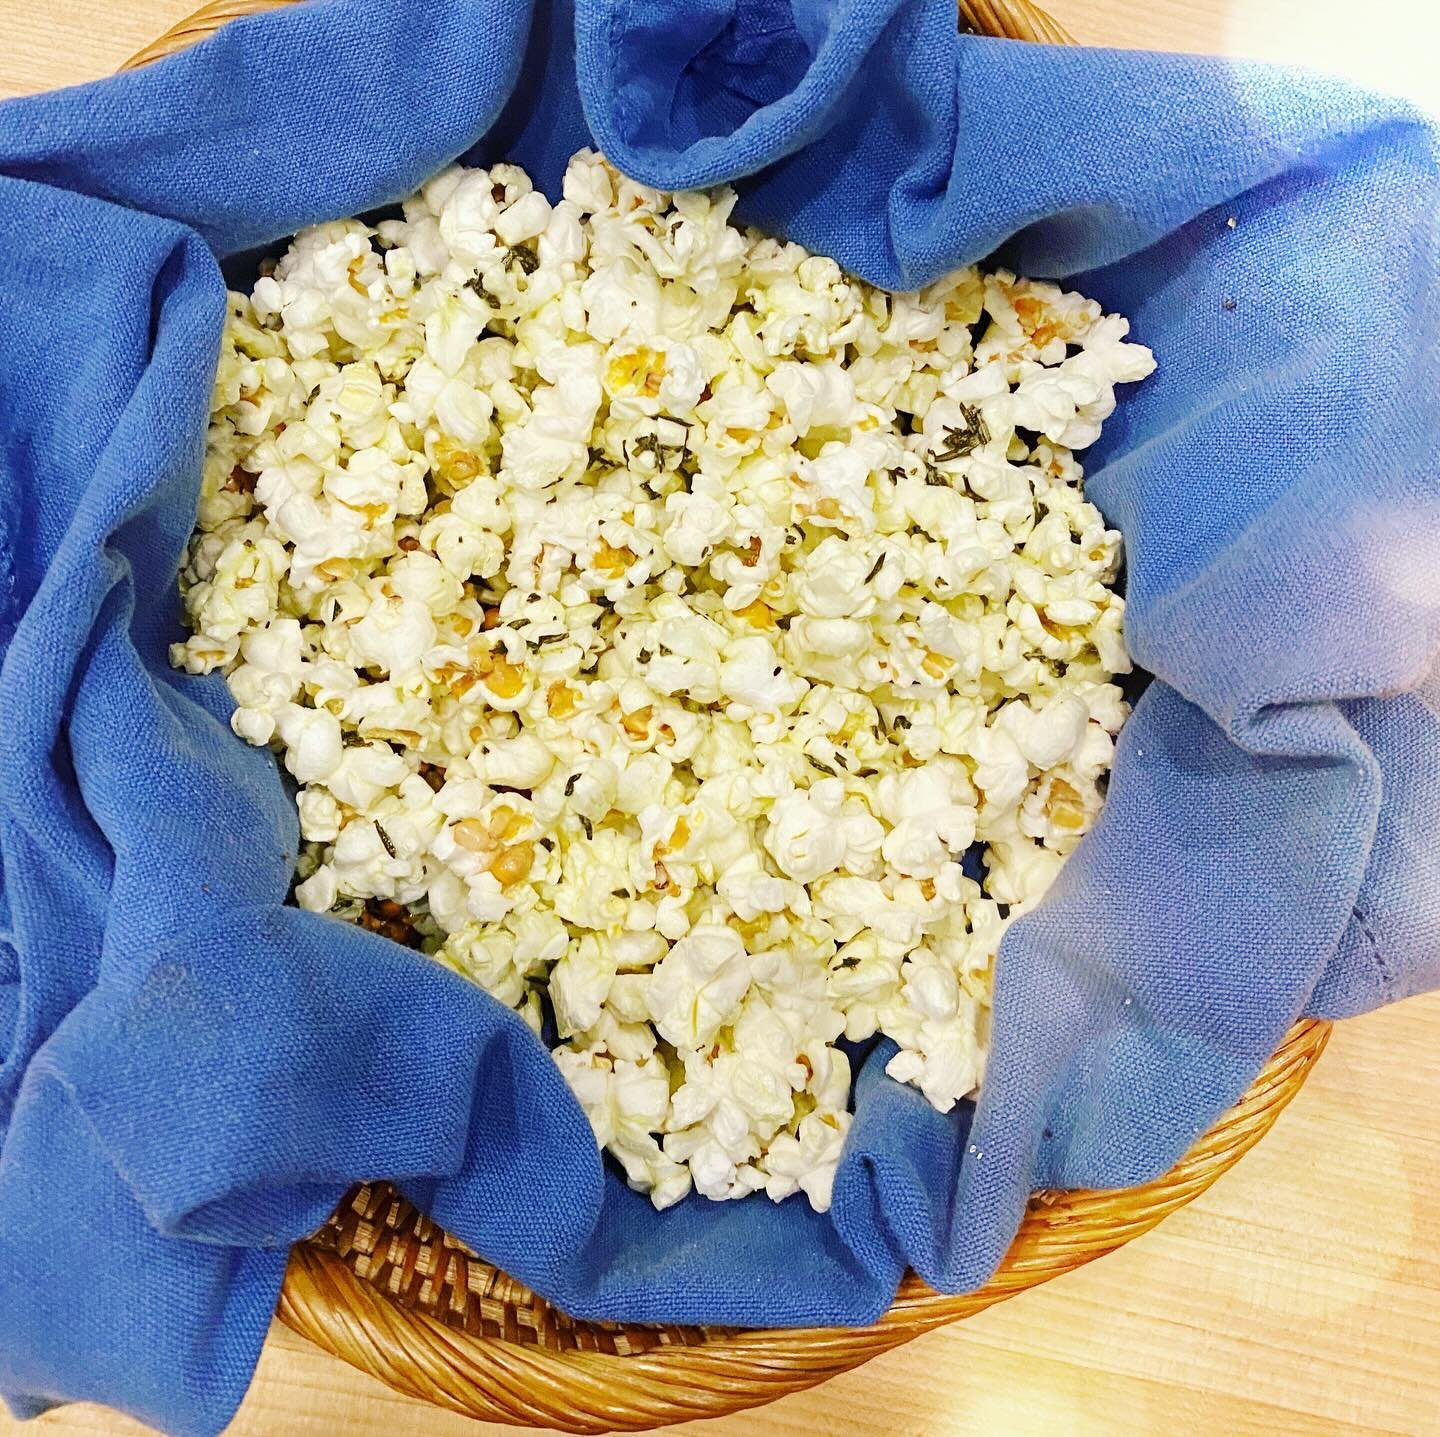 Popcorn with wine? Heck yes. Especially when you&rsquo;re curled up on the couch, watching a show with someone dear. Munch it alone or, for a casual party, include it with a variety of appetizers such as crudites and dips, cheeses, cured meats, and o